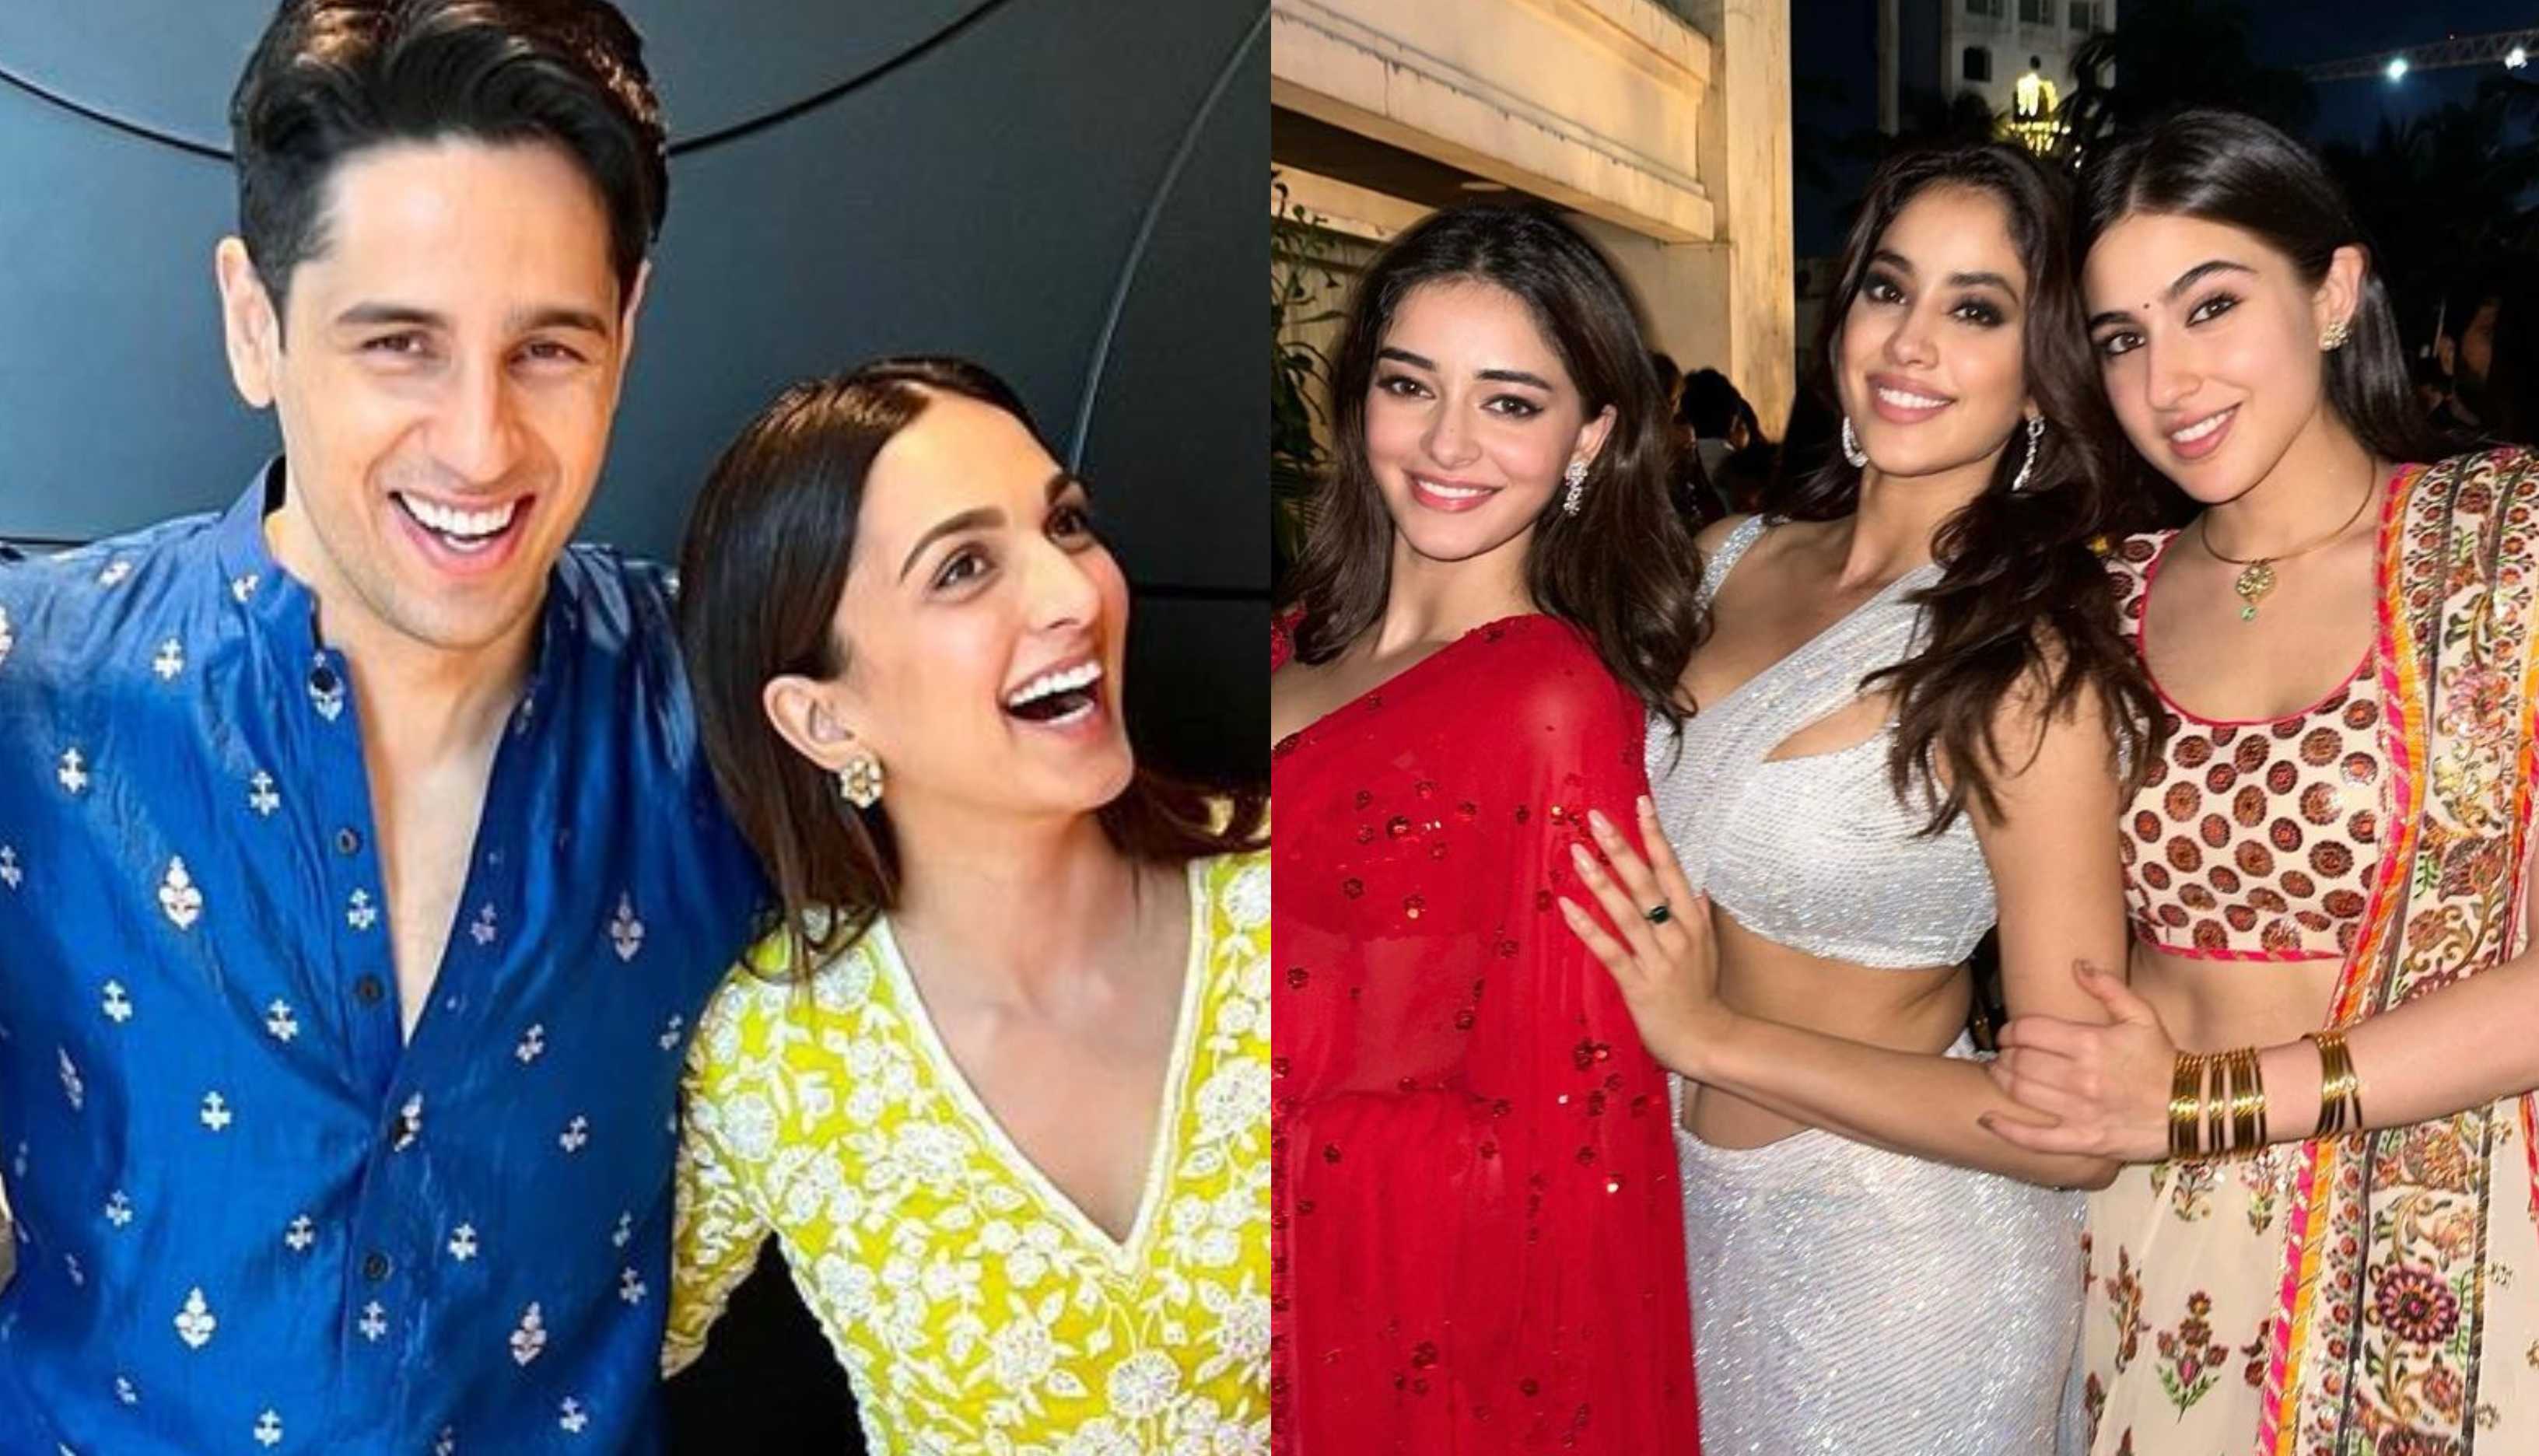 Kiara and Sidharth are all smiles on Diwali; Sara, Ananya & Janhvi prove ‘heroines can't be friends’ is just a myth